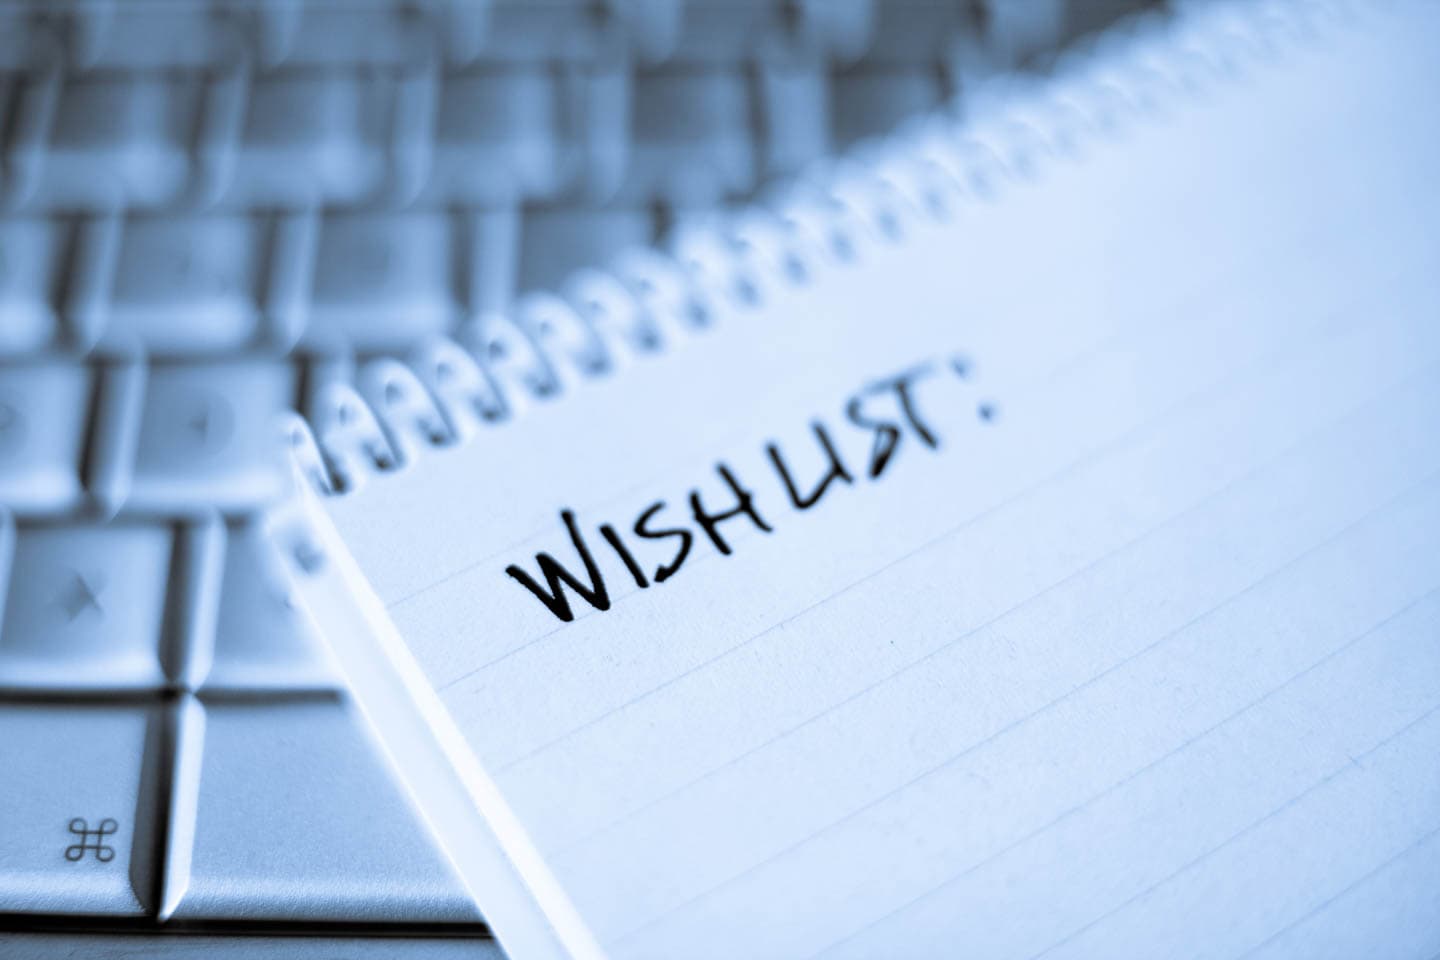 Wishlist printed on a pad of paper